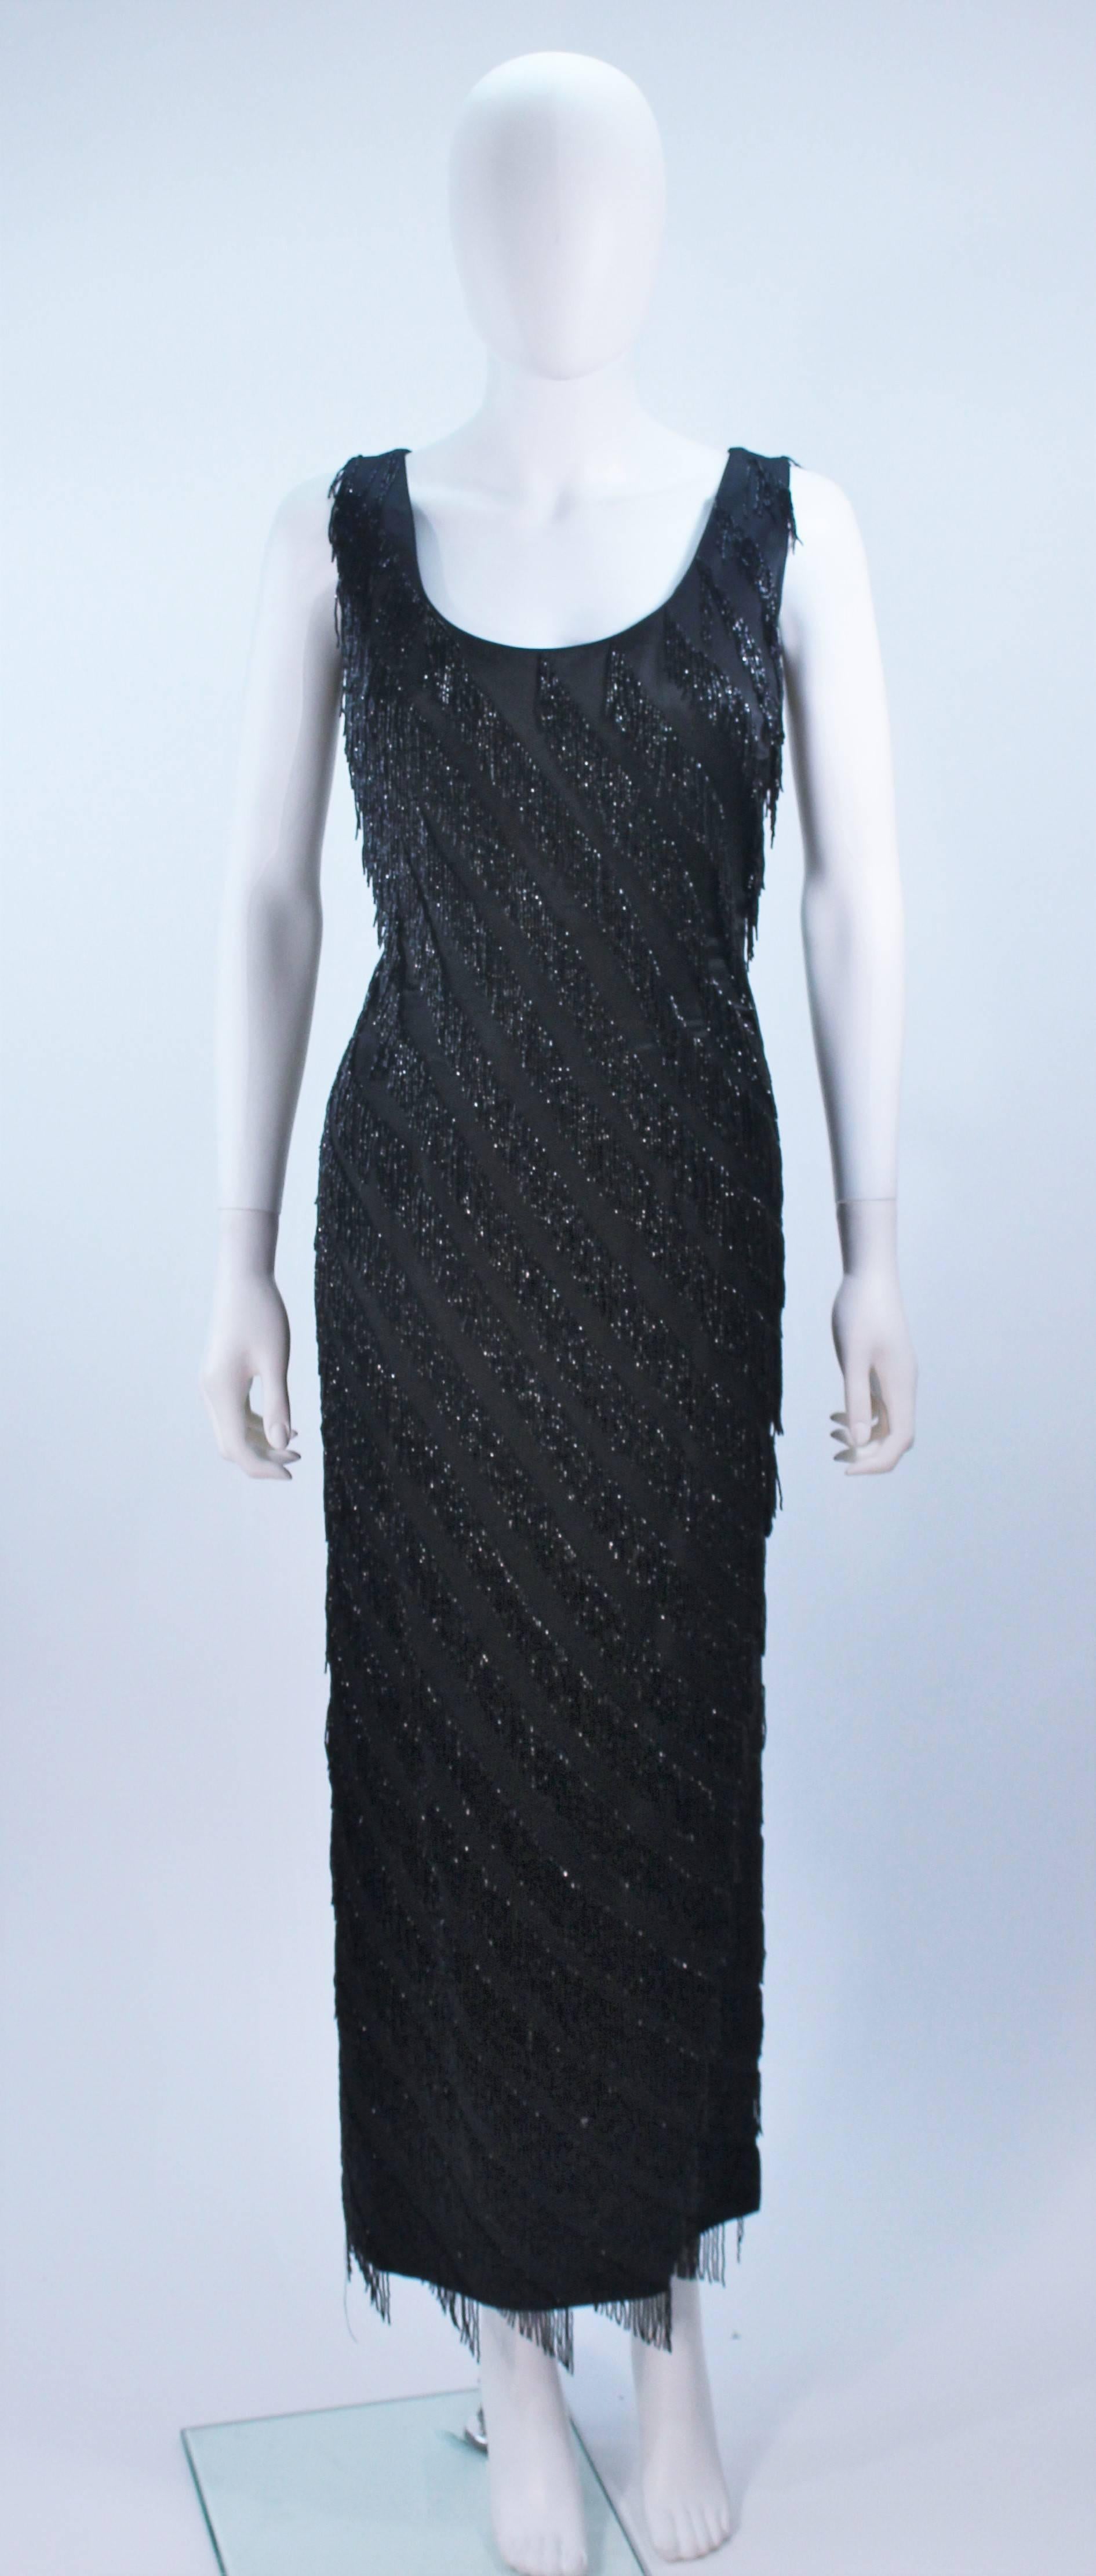  This Pauline Shen  gown is composed of a black silk with a beaded fringe detailing throughout. There is a center back zipper closure. In great vintage condition. 

  **Please cross-reference measurements for personal accuracy. Size in description